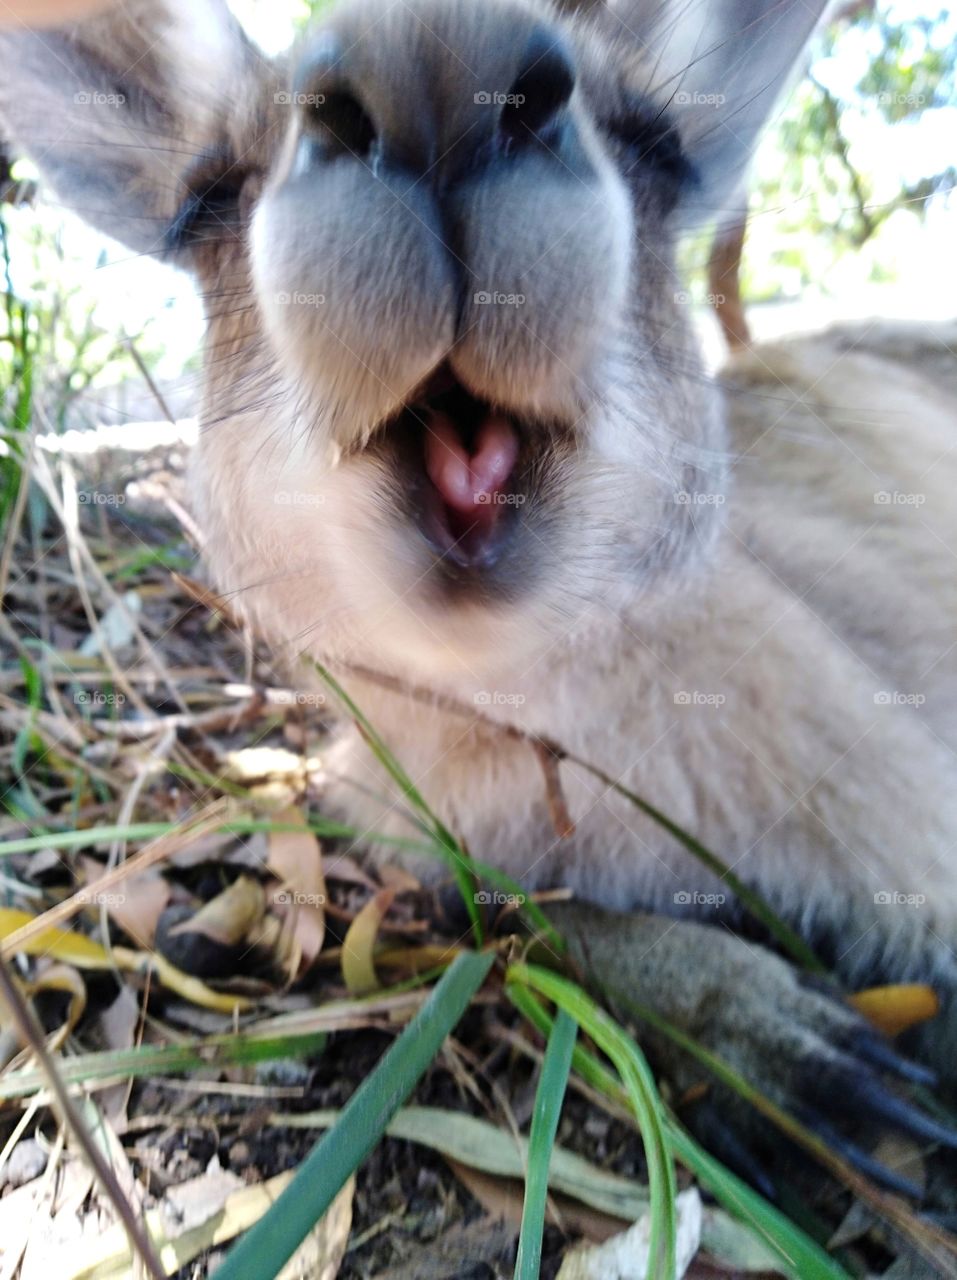 A closeup of a kangaroo with their mouth open, this was taken in Australia begining of this year. Love kangaroos? Who doesn't!